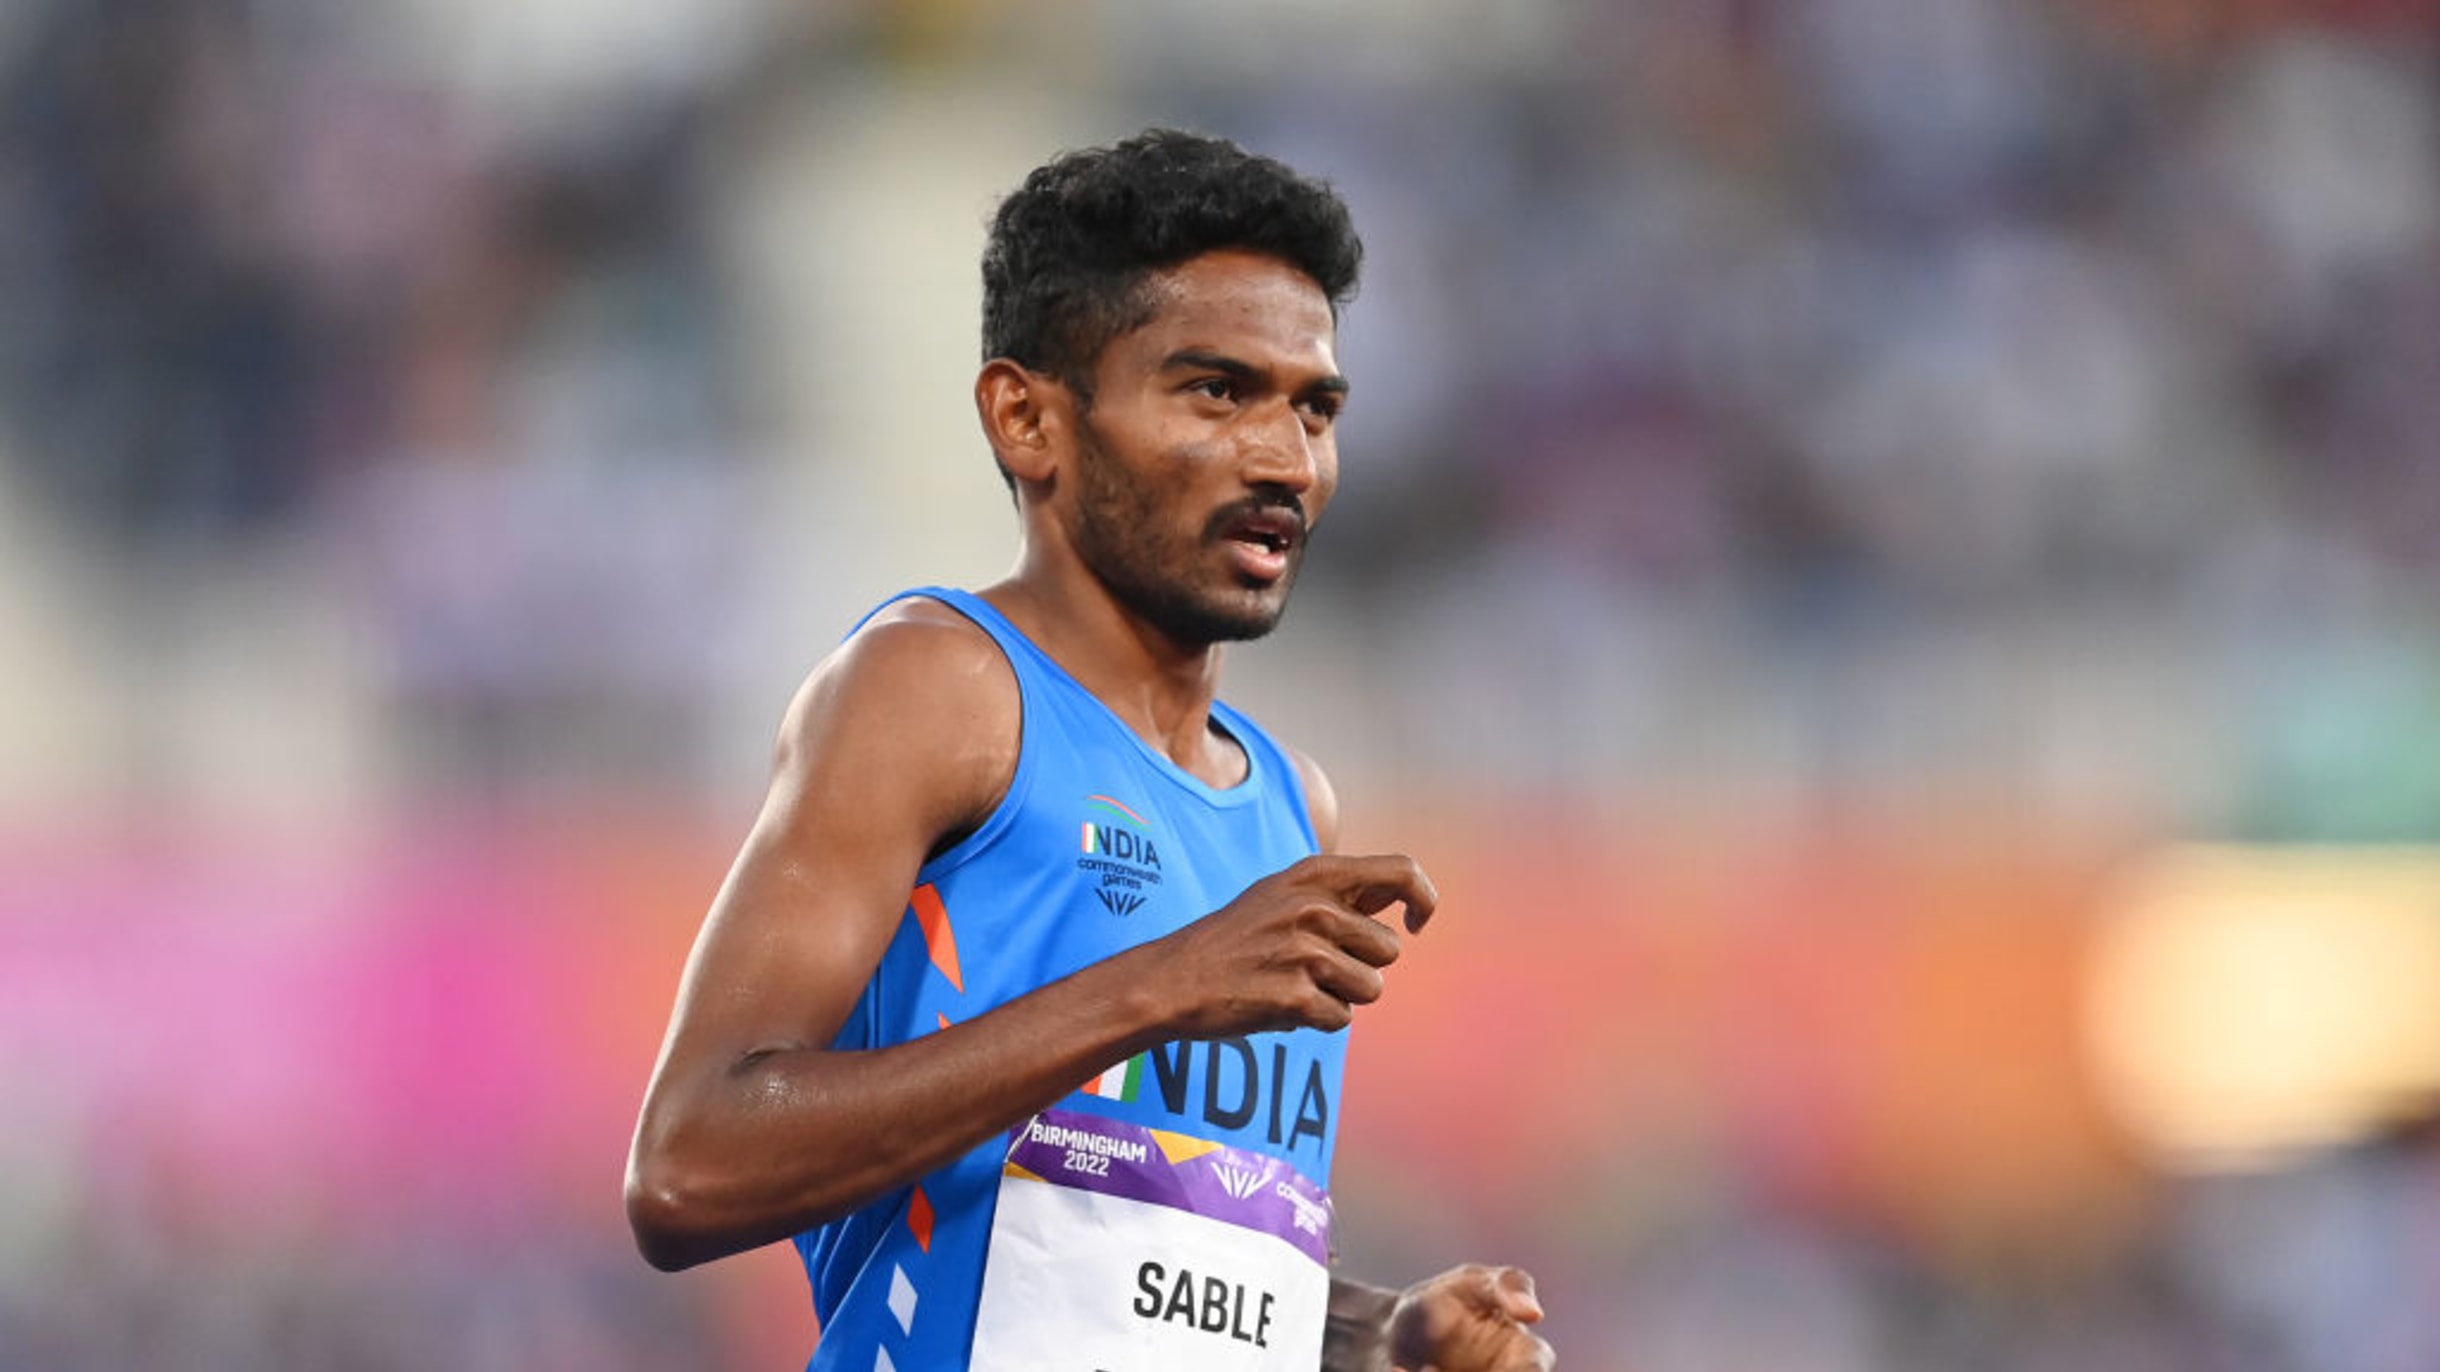 Rabat Diamond League 2023 Watch live streaming and telecast in India